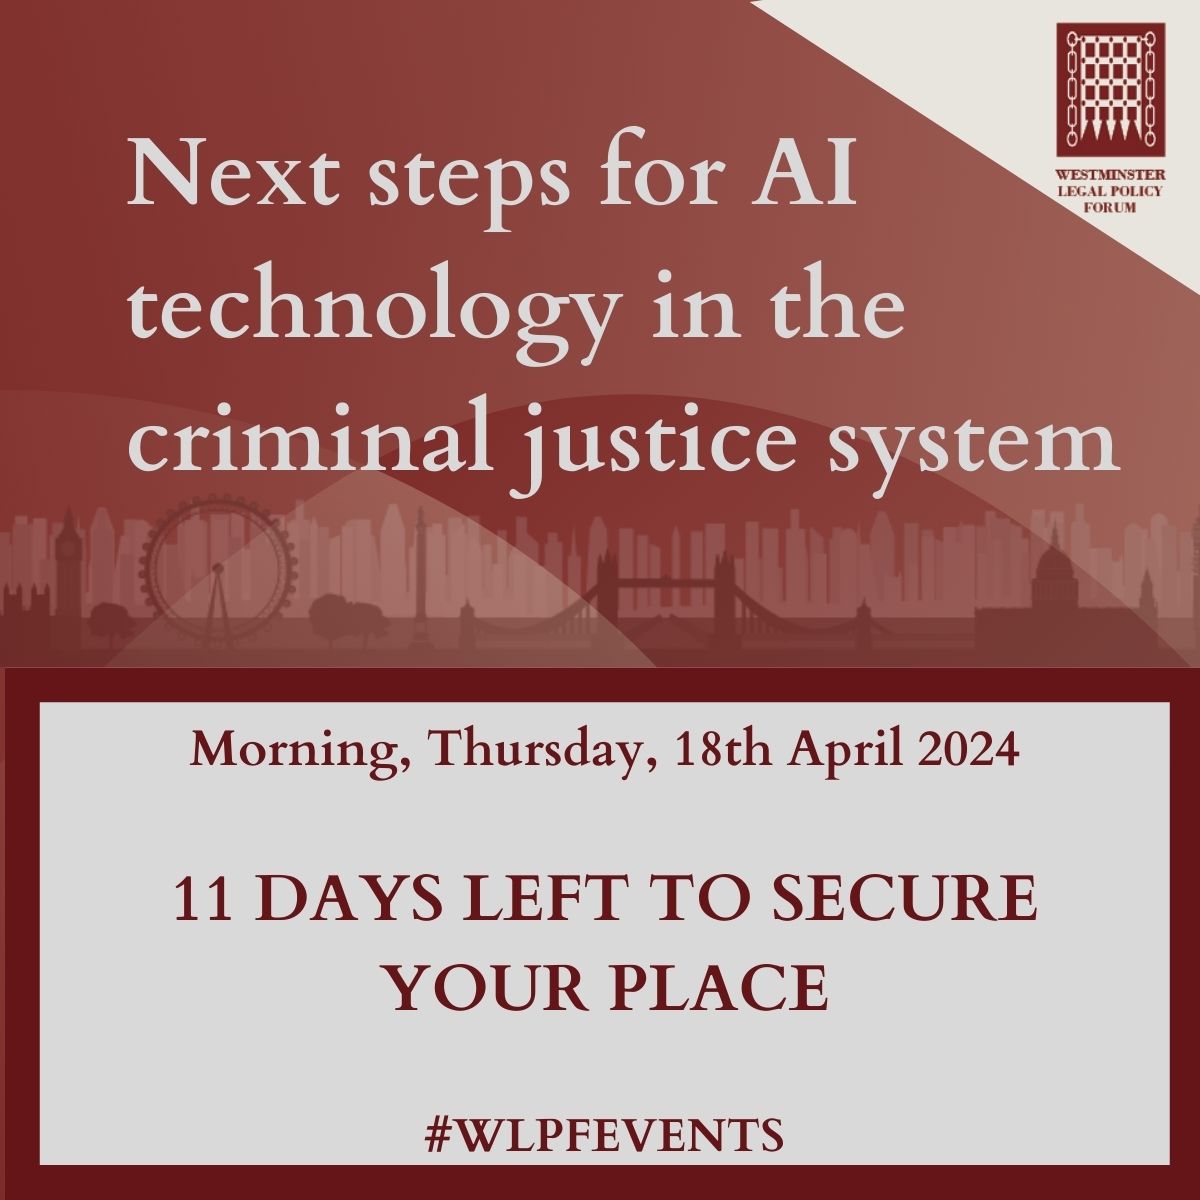 Join Westminster Legal Policy Forum on 18th April to discuss Next steps for AI technology in the criminal justice system.

11 days left to book your place! 

Secure your place: westminsterforumprojects.co.uk/conference/AI-…

#WLPFEVENTS #legaltech #justicetech #aiinjustice #legalinnovation #ai #chatgpt